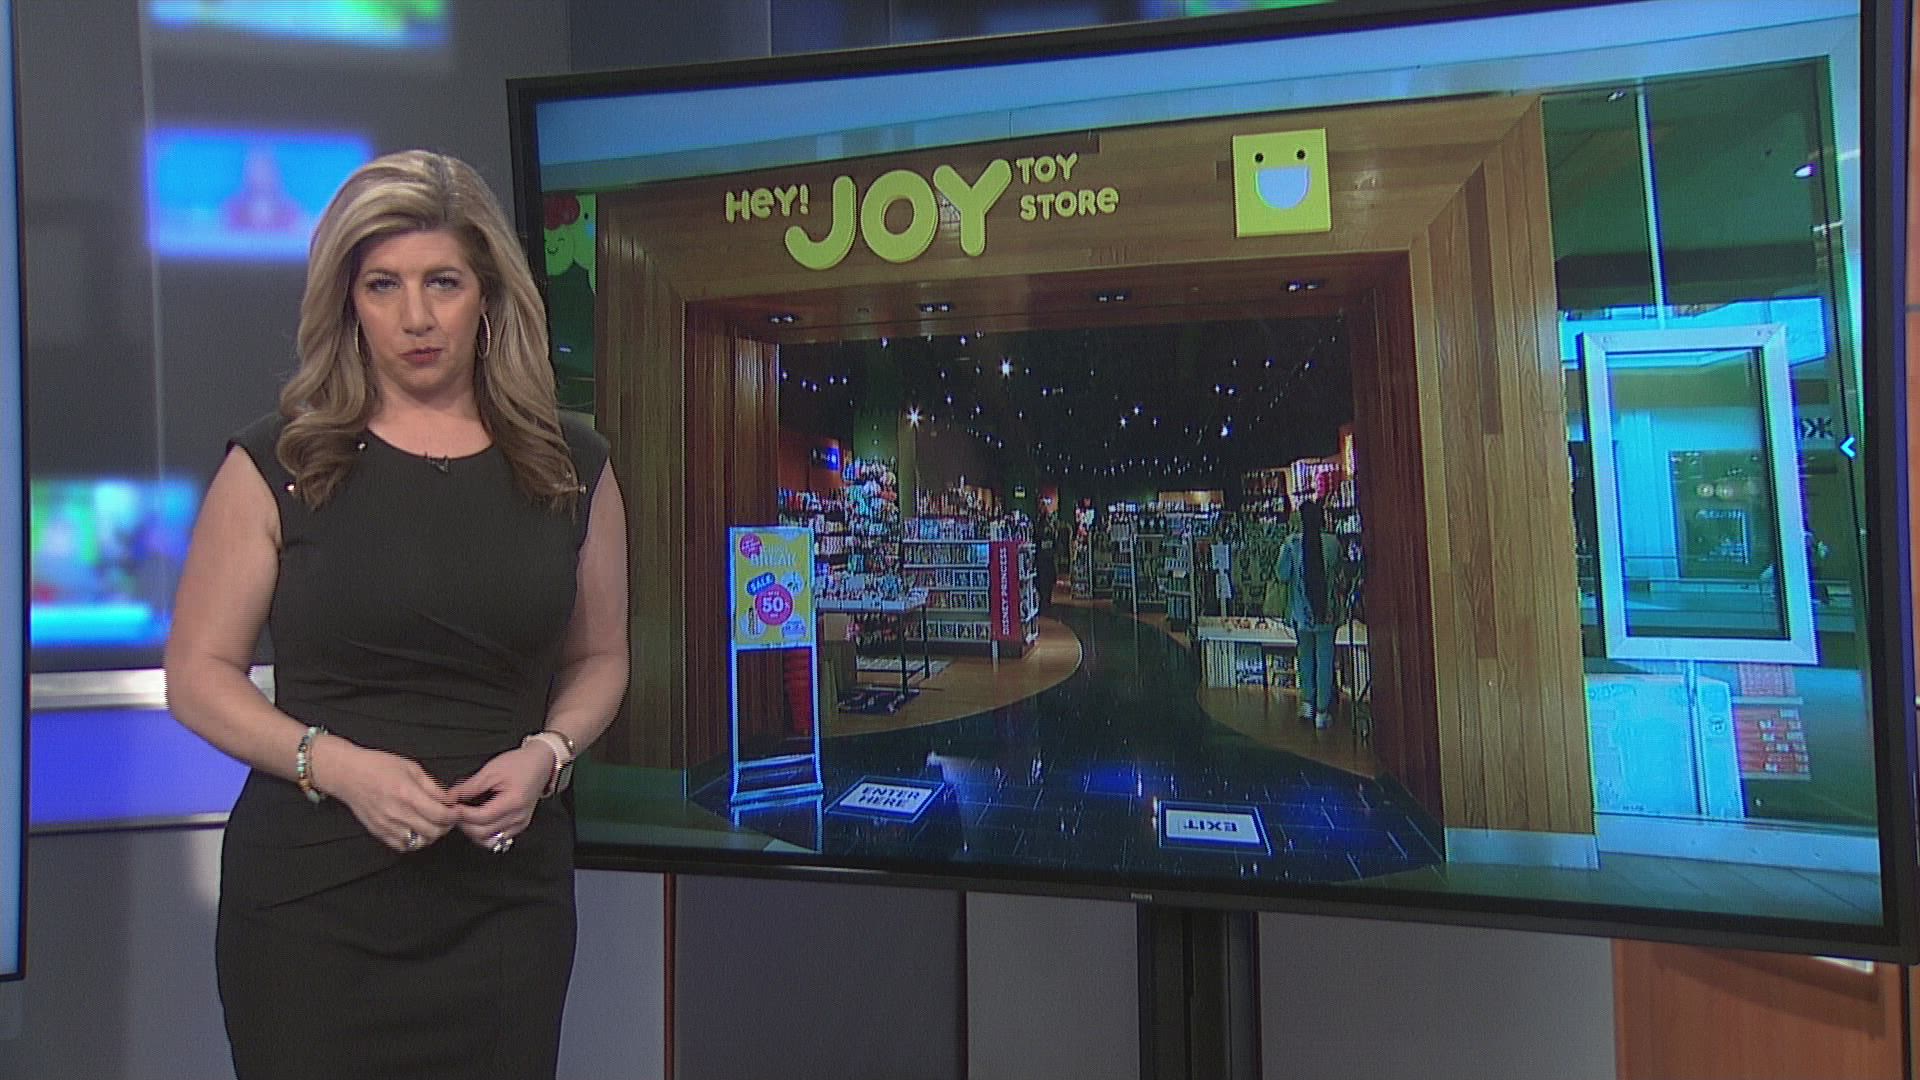 Hey! Joy Opens Second Toy Store At Roosevelt Field Mall